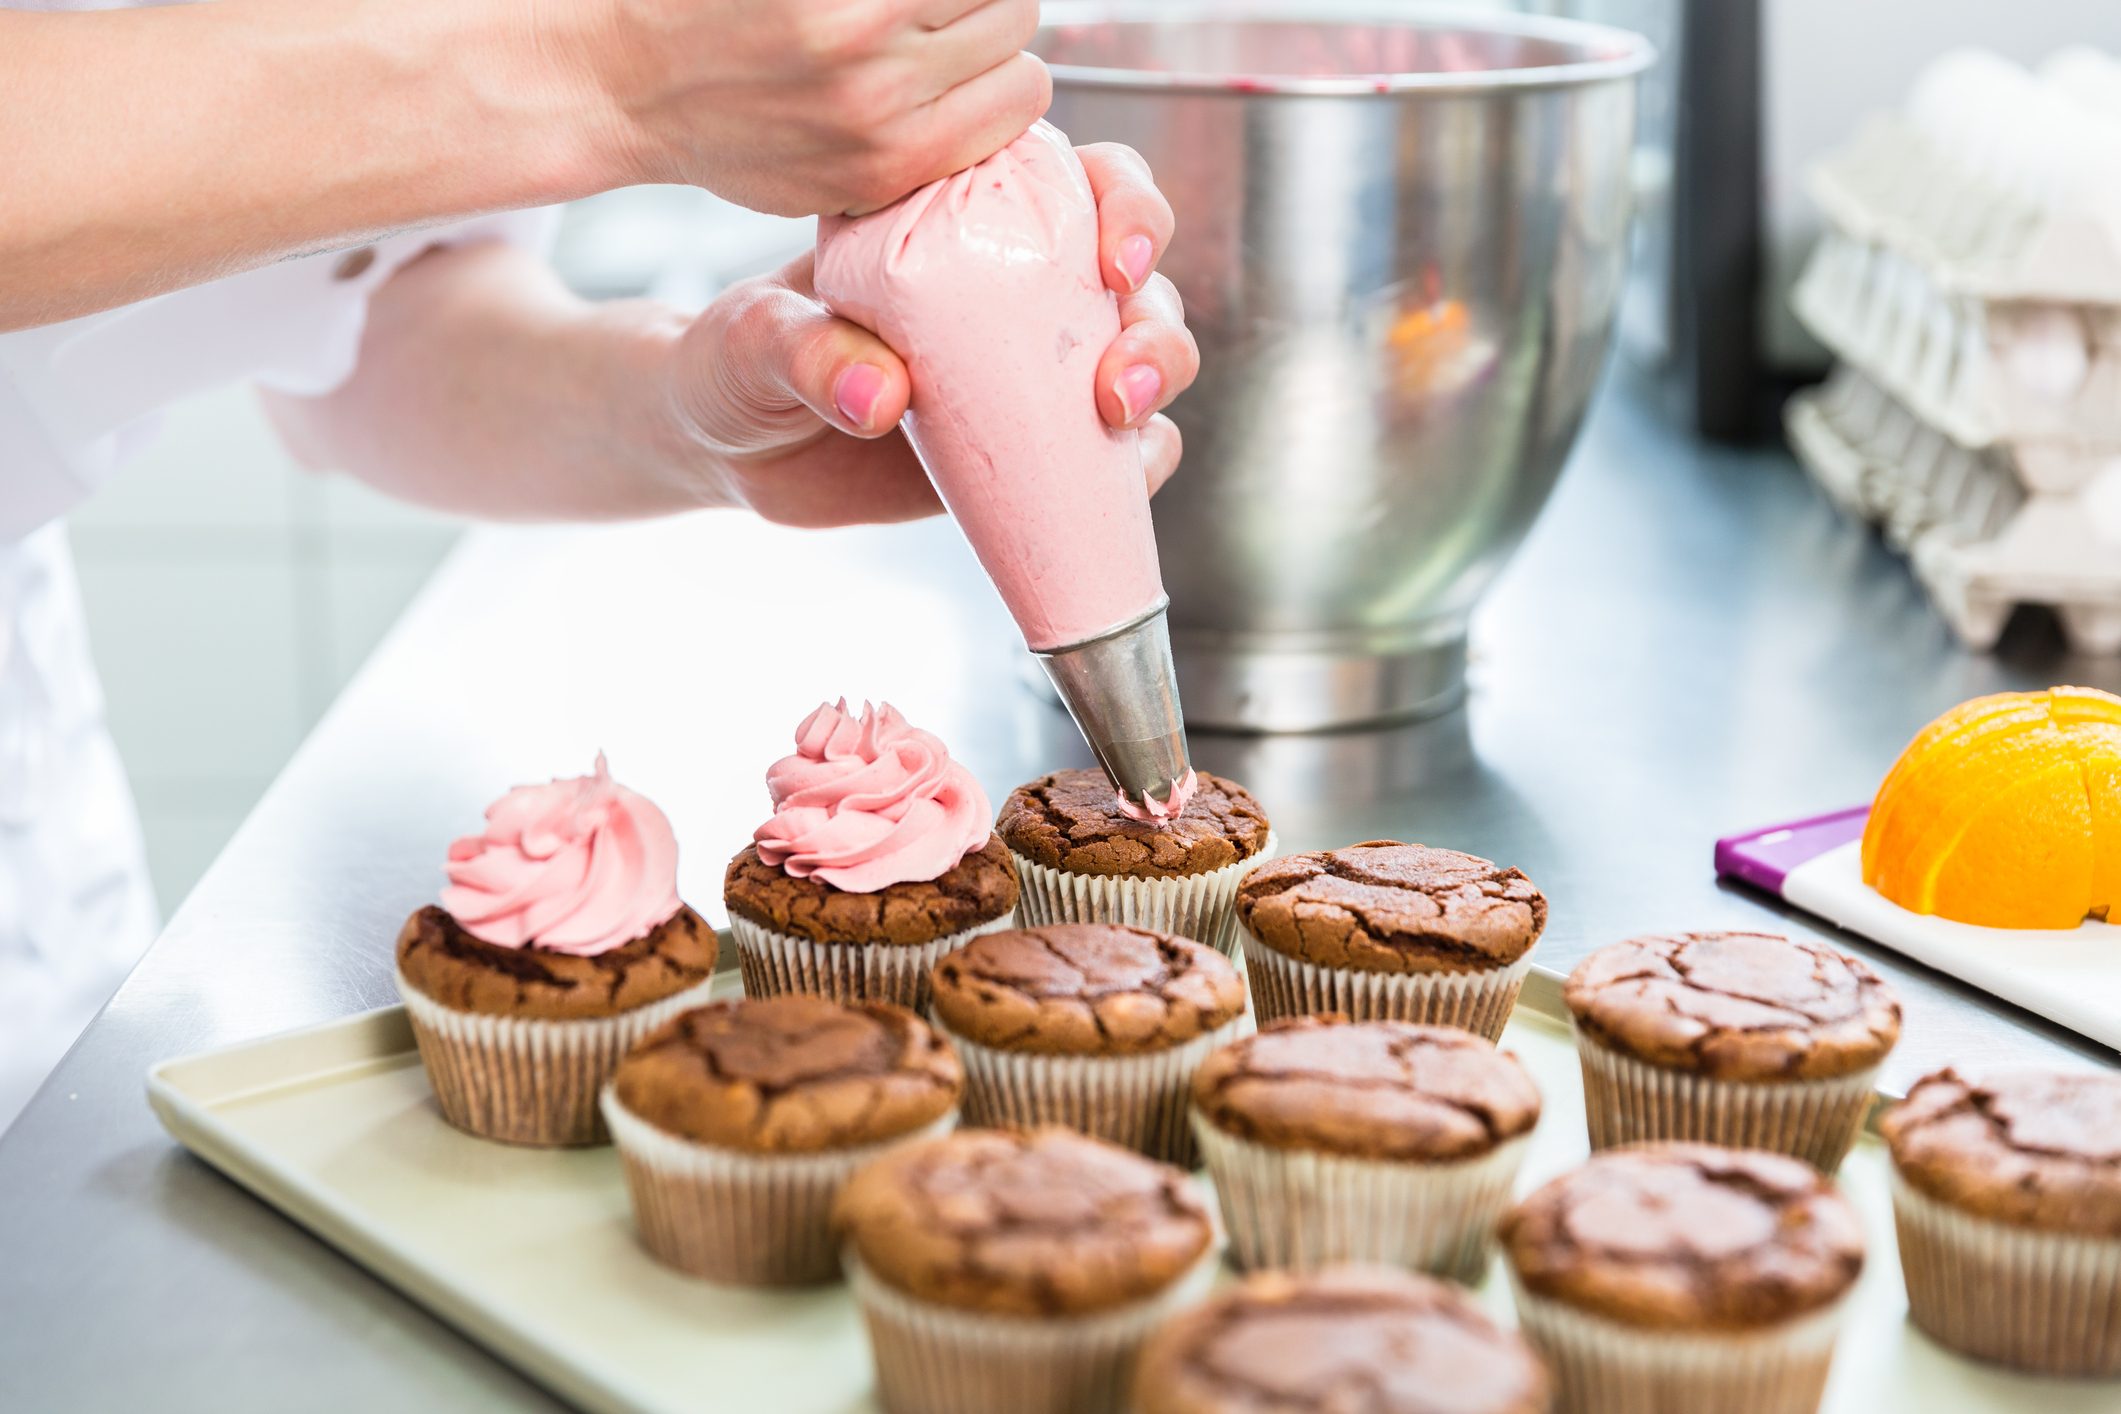 How to Use a Piping Bag